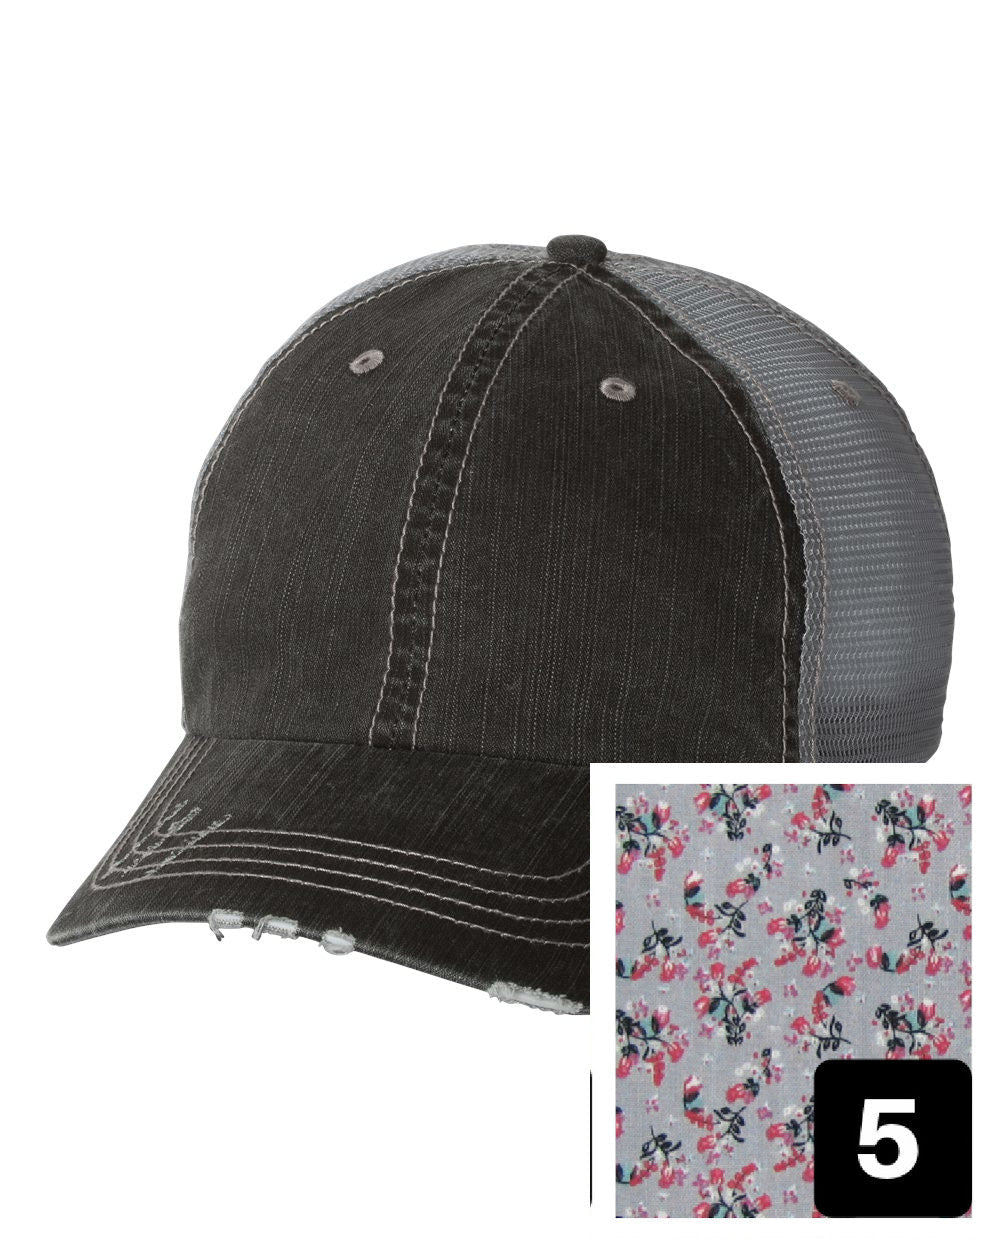 gray distressed trucker hat with purple and pink floral fabric state of Idaho